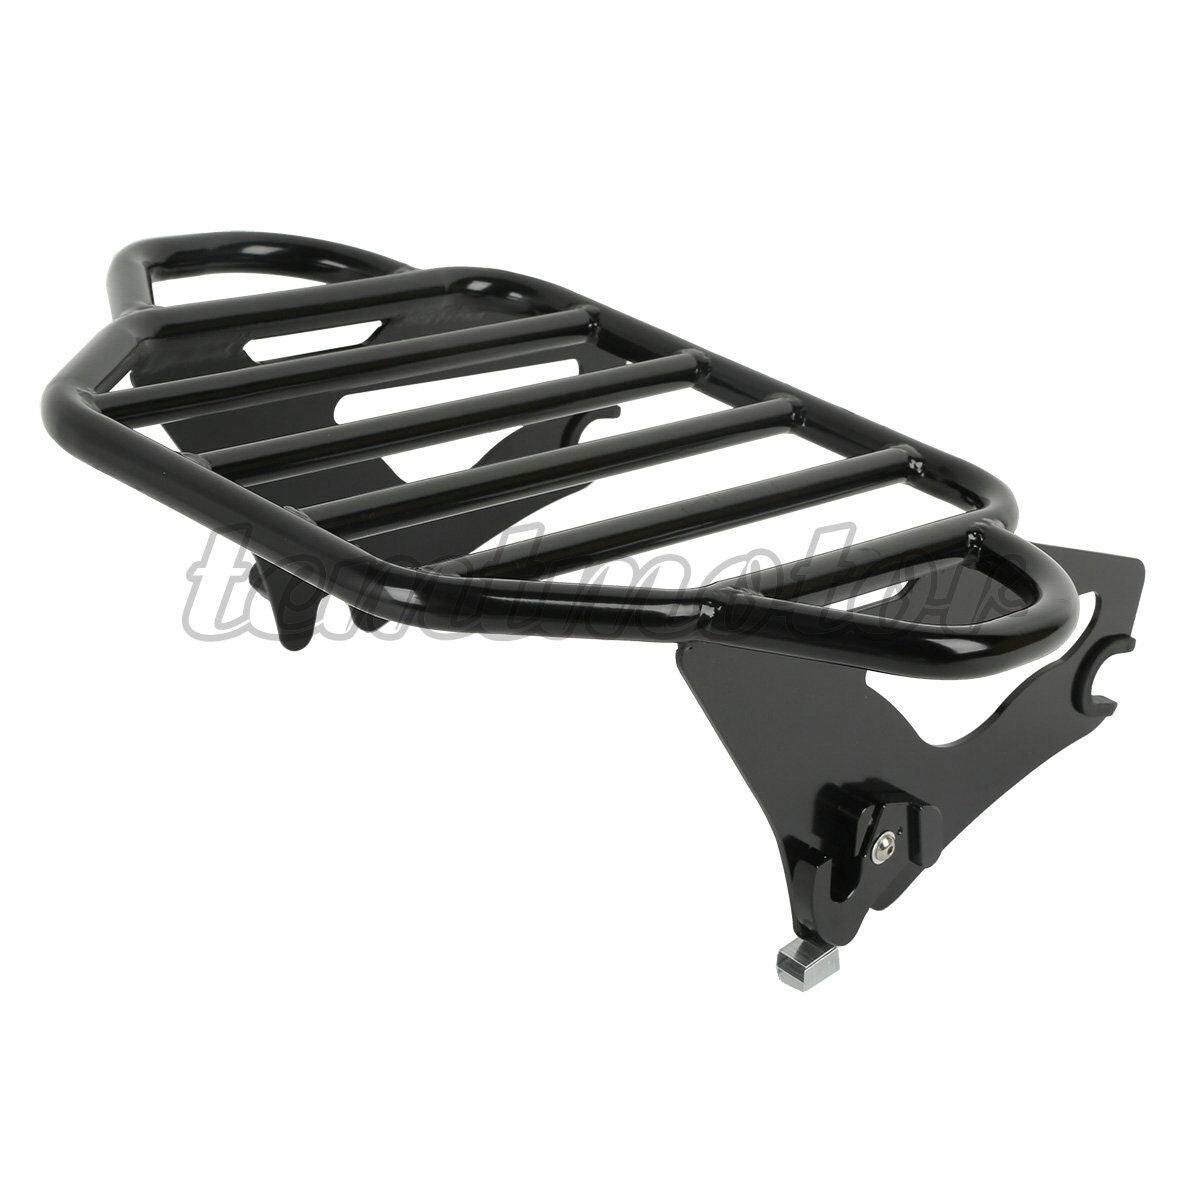 Detachable 2-Up Luggage Rack Fit For Harley Road King Street Electra Glide 09-21 - Moto Life Products